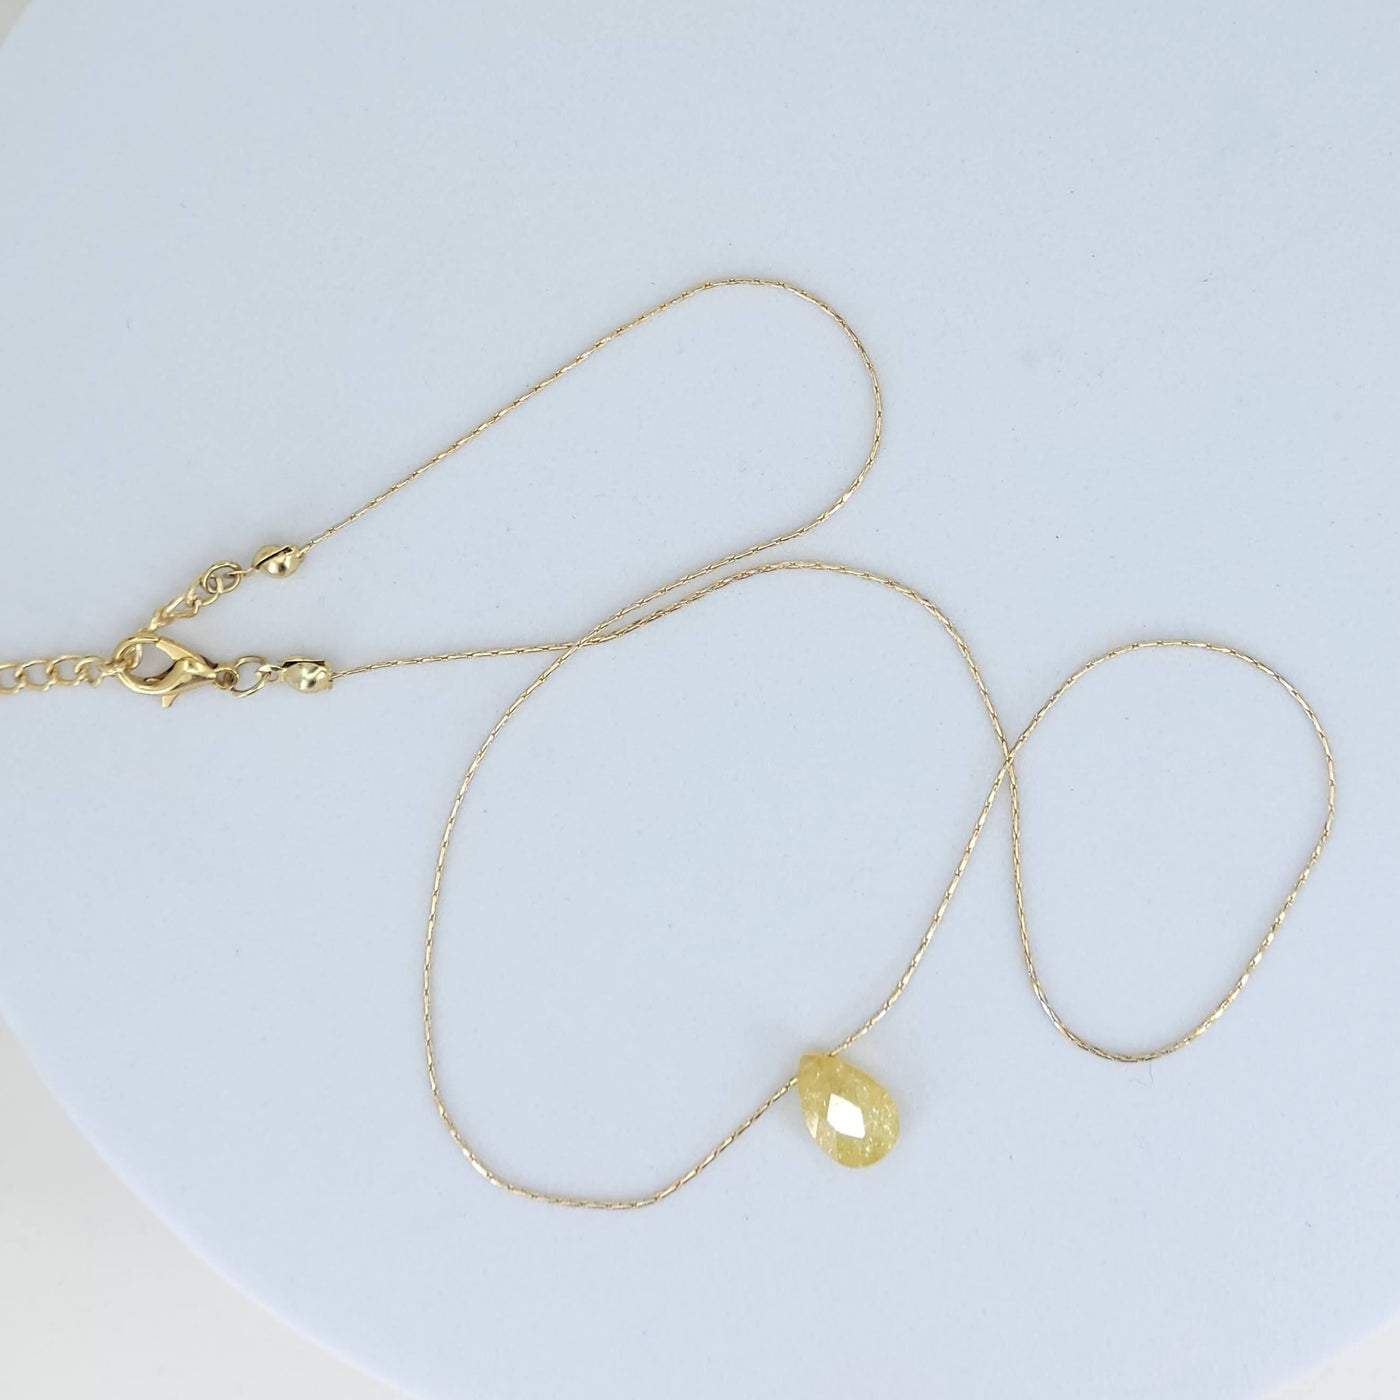 teardrop necklace with faceted stone and snake chain